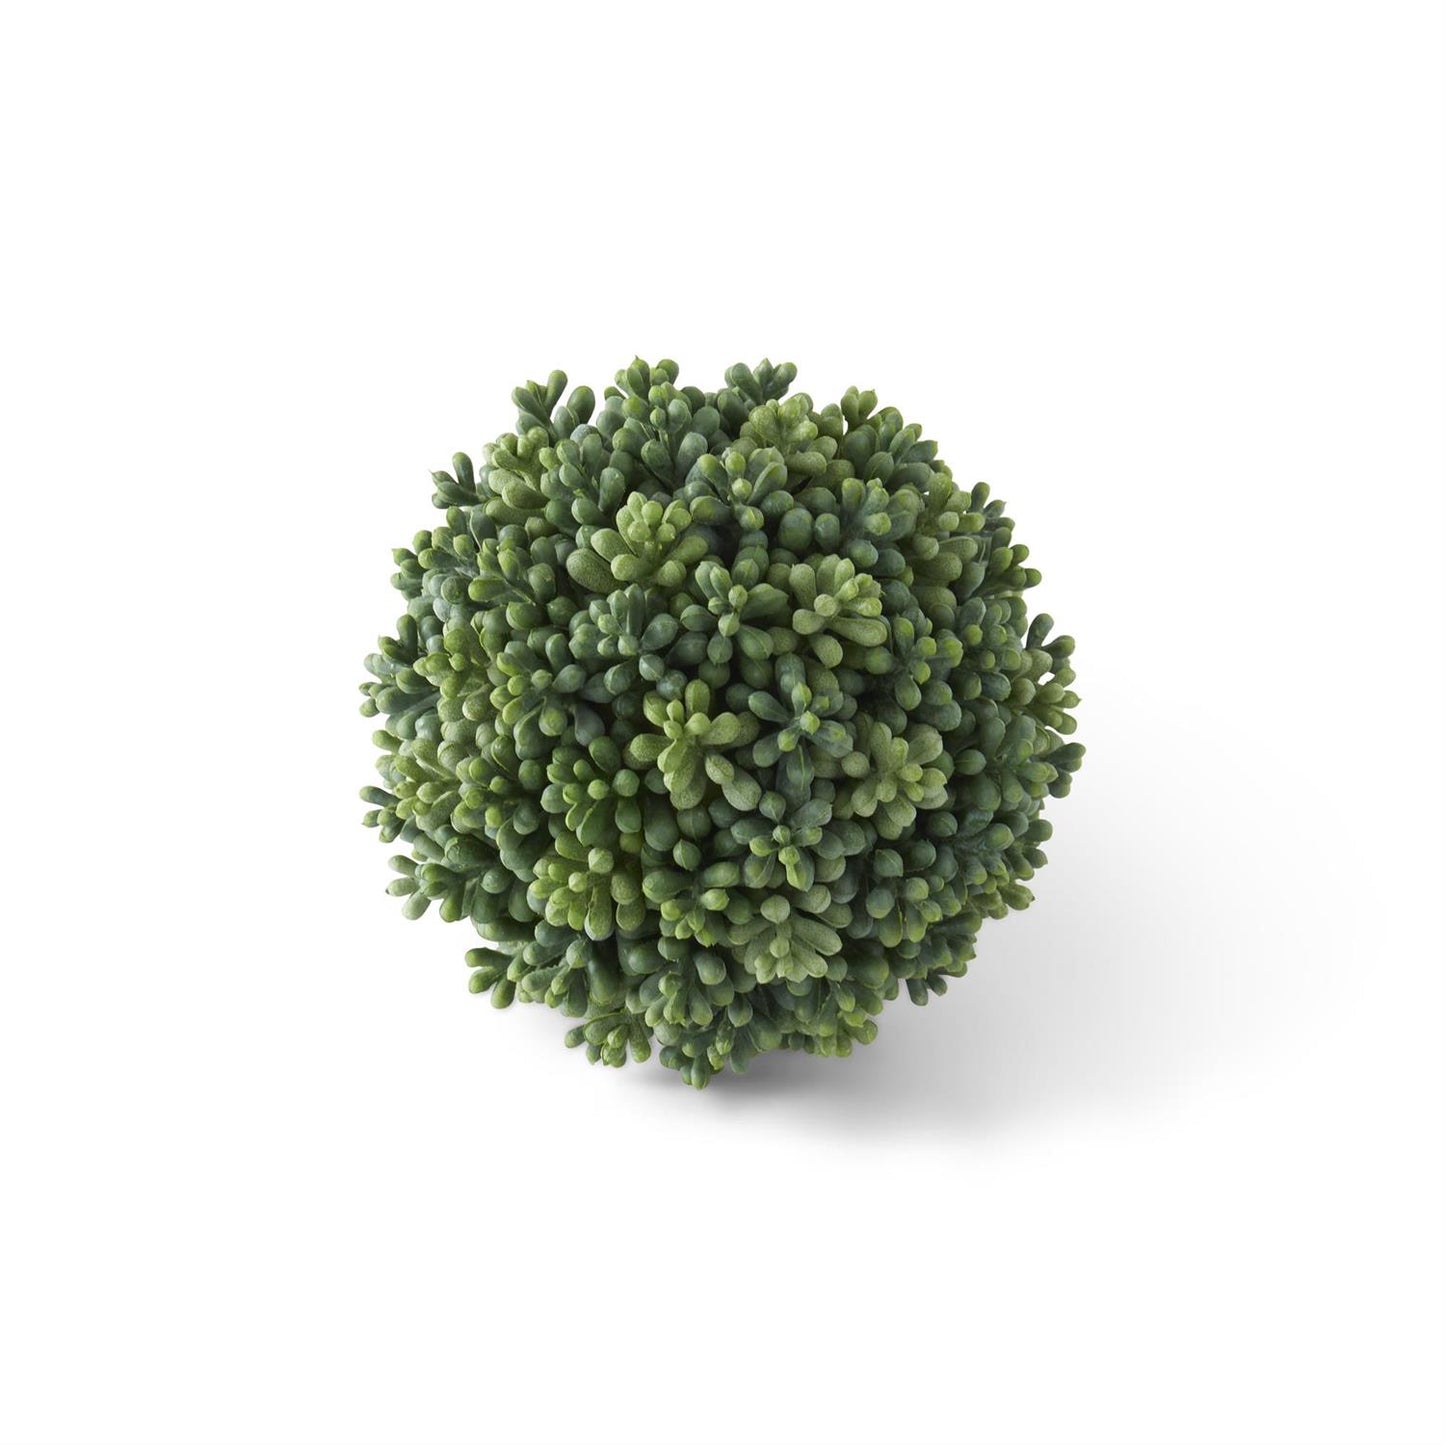 GREEN BERRY SEED BALL